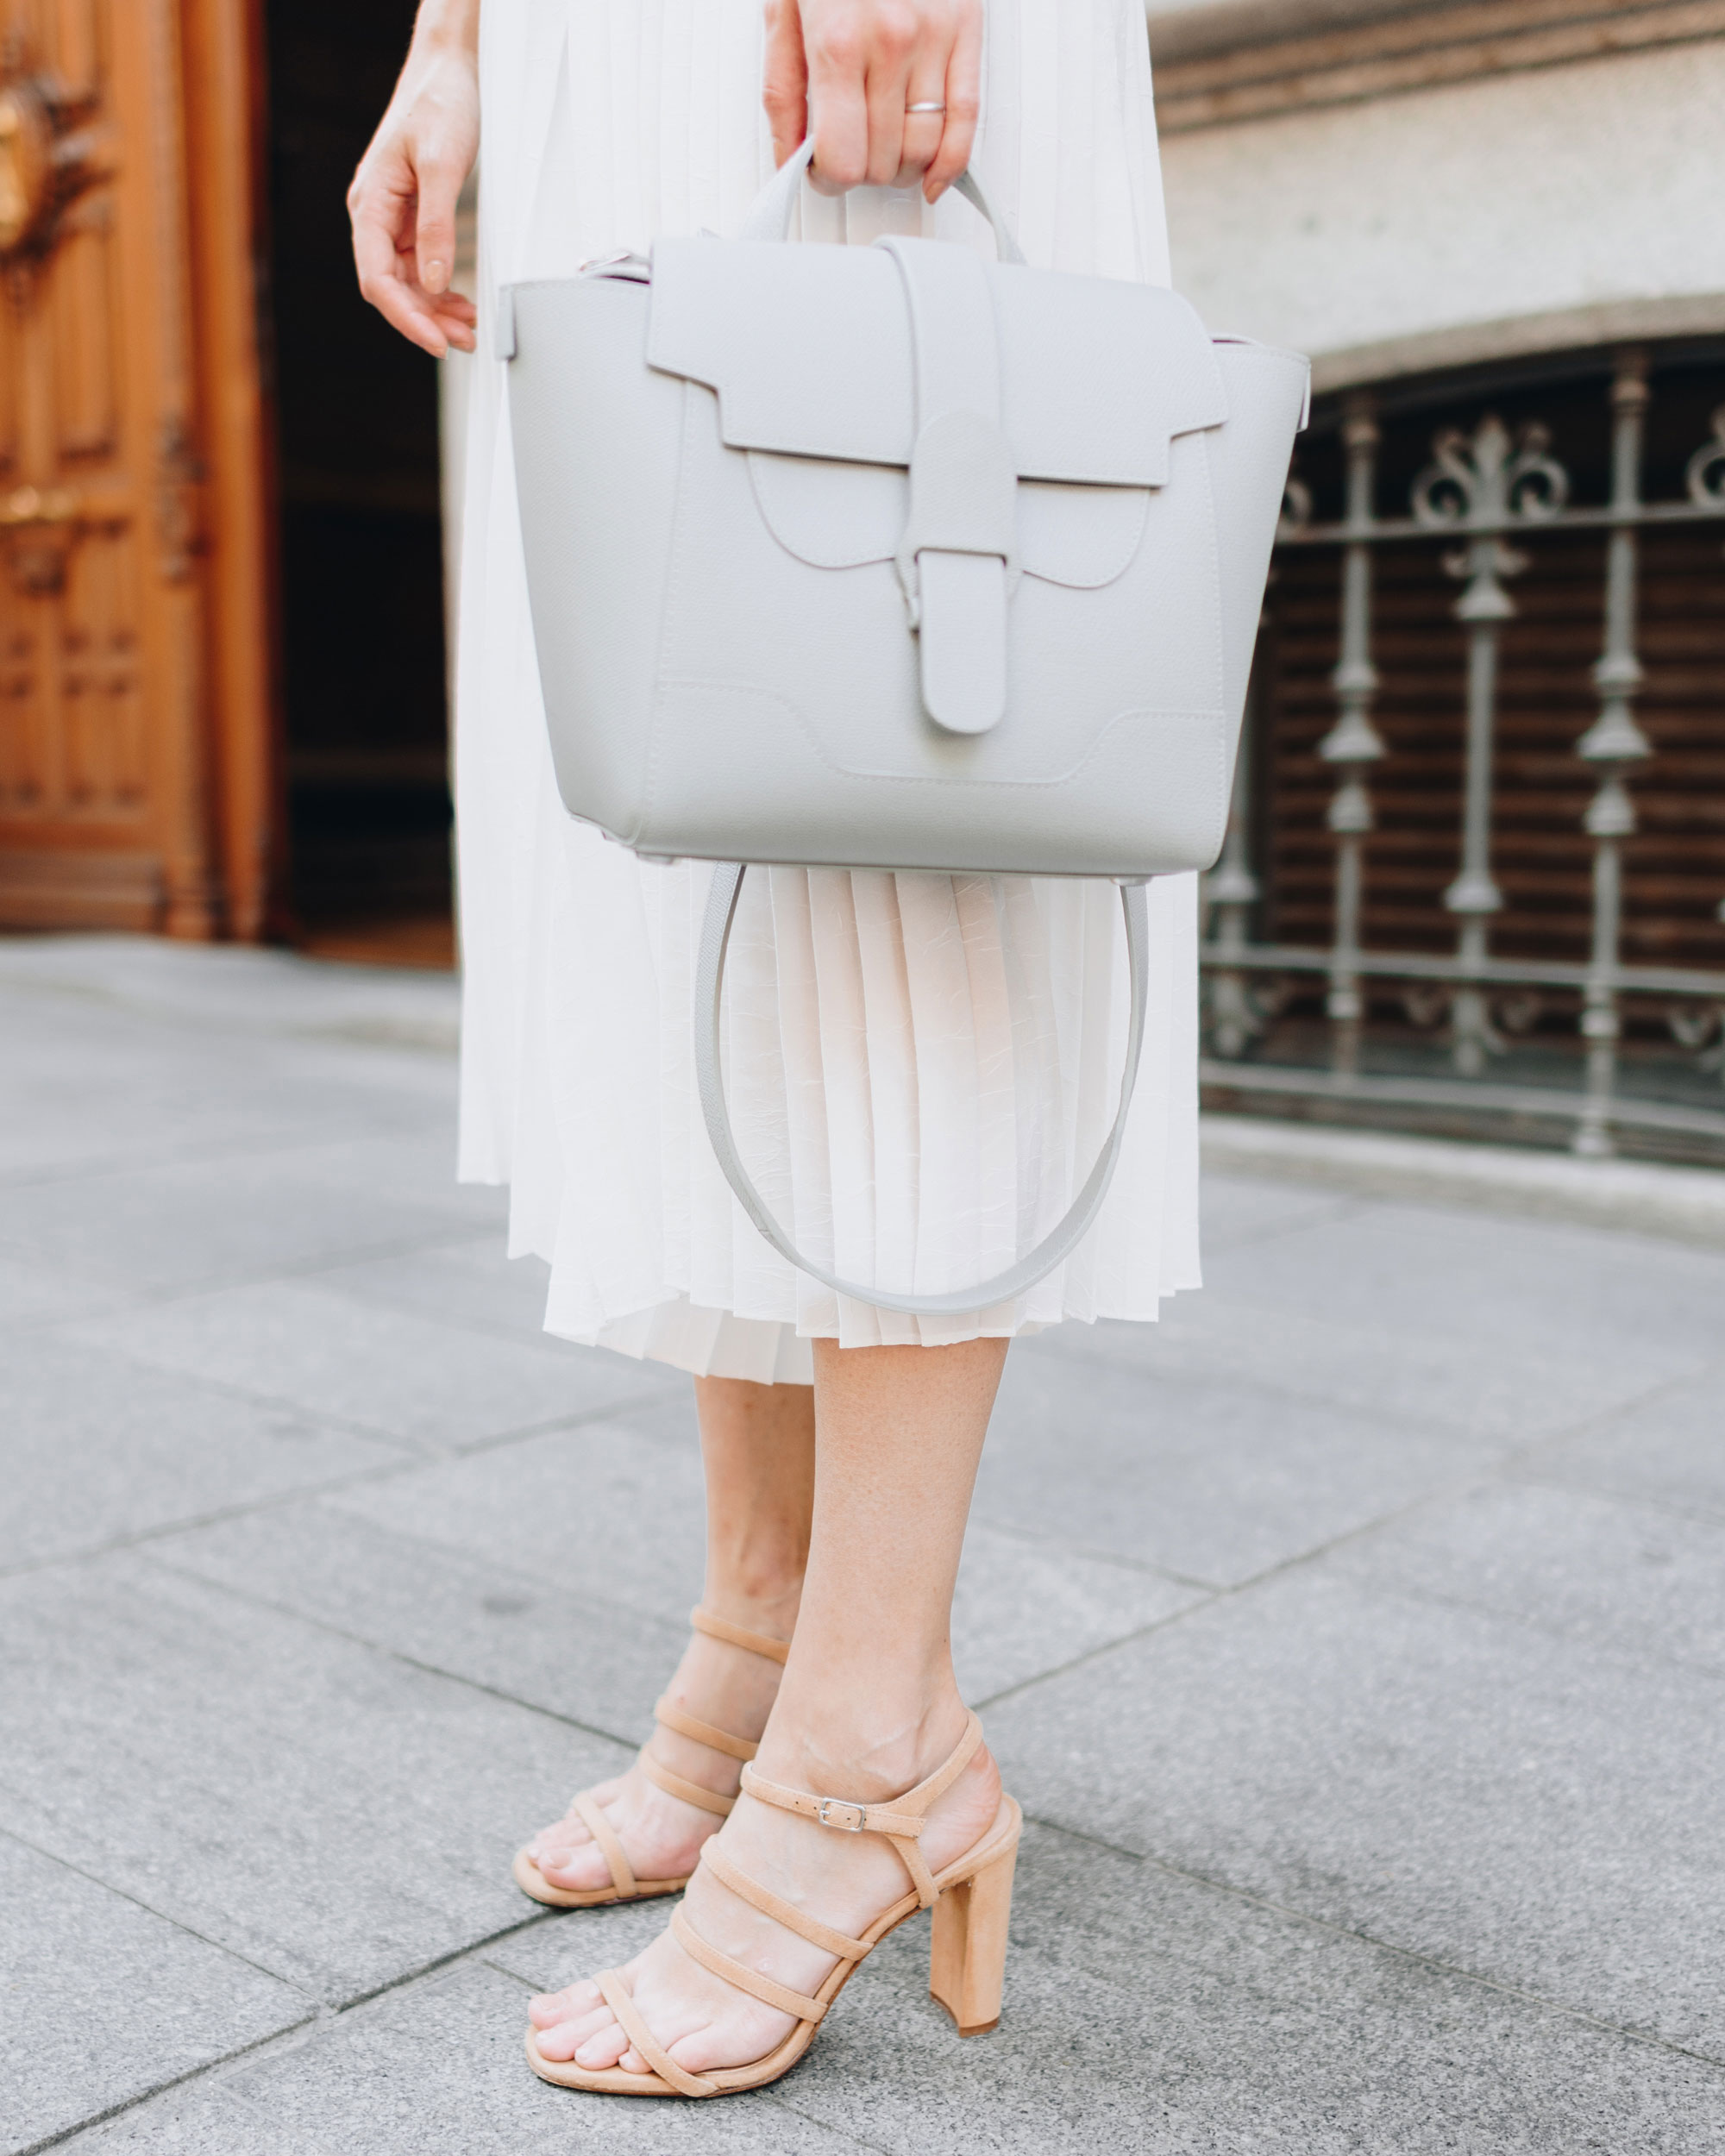 Neutral Color Bags: Which Neutral Is Right For You? - SENREVE